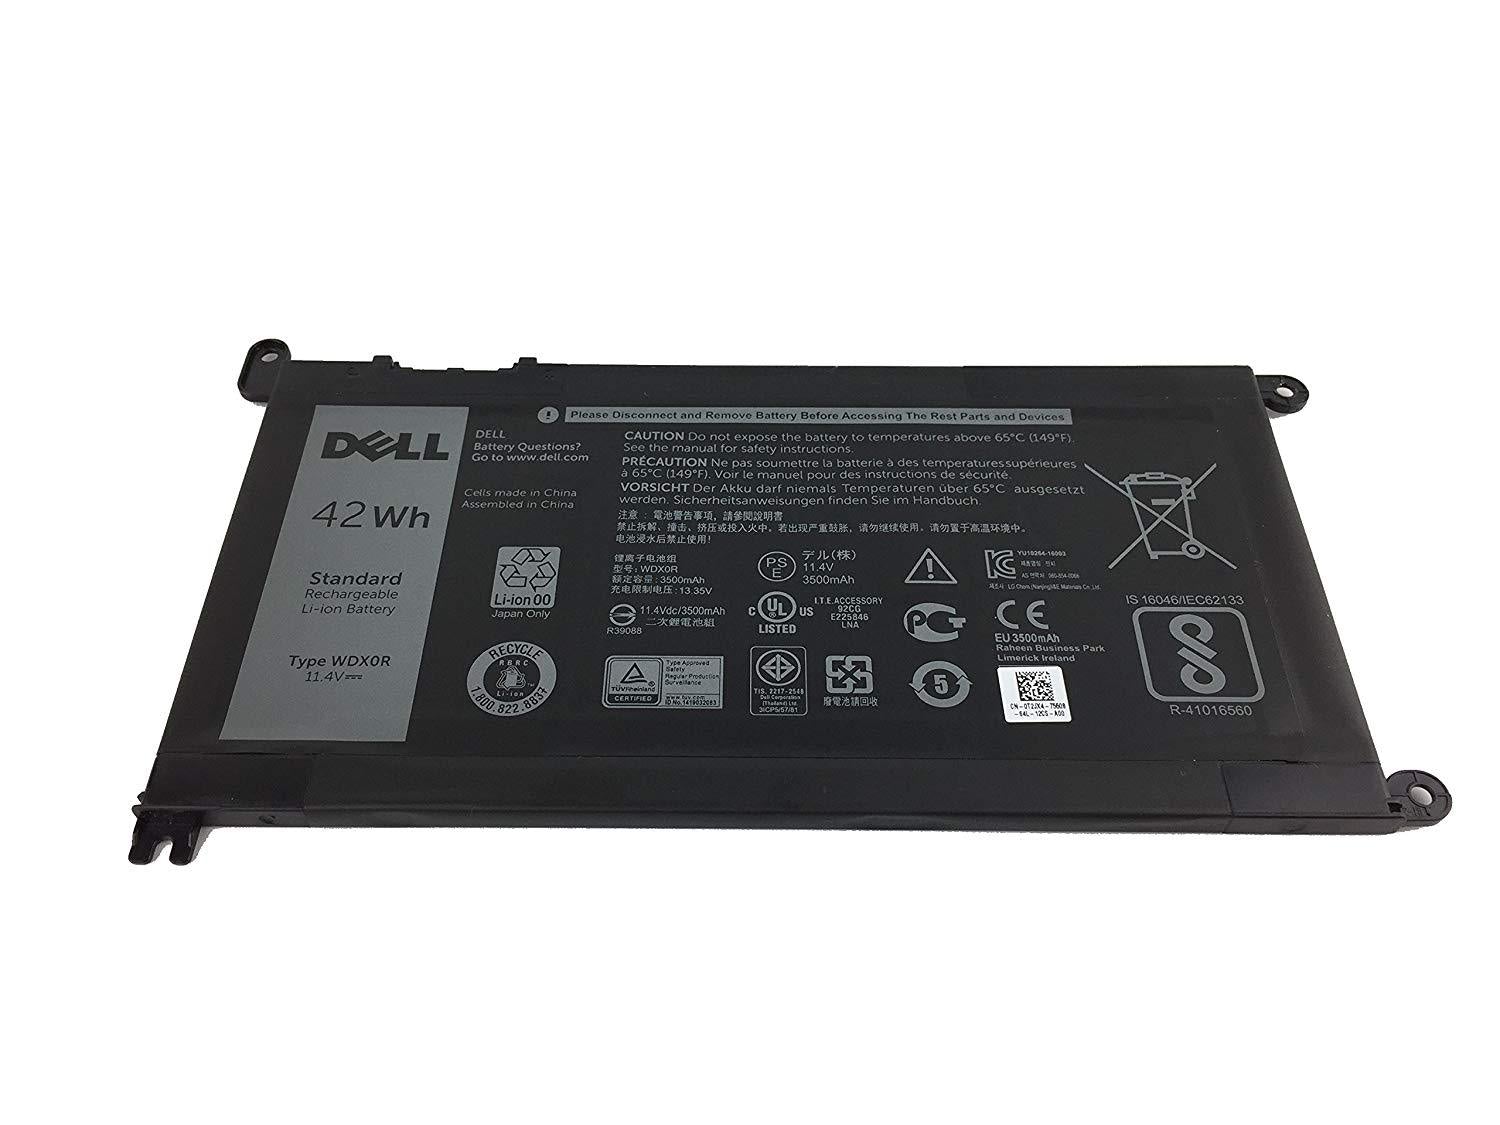 Replacement Dell Inspiron 15 (5567)  P75G001, Dell Inspiron 15 (5568) / 13 (5368/5378) 42Wh 3-cell Replacement Laptop Battery - (WDX0R,0WDX0R)